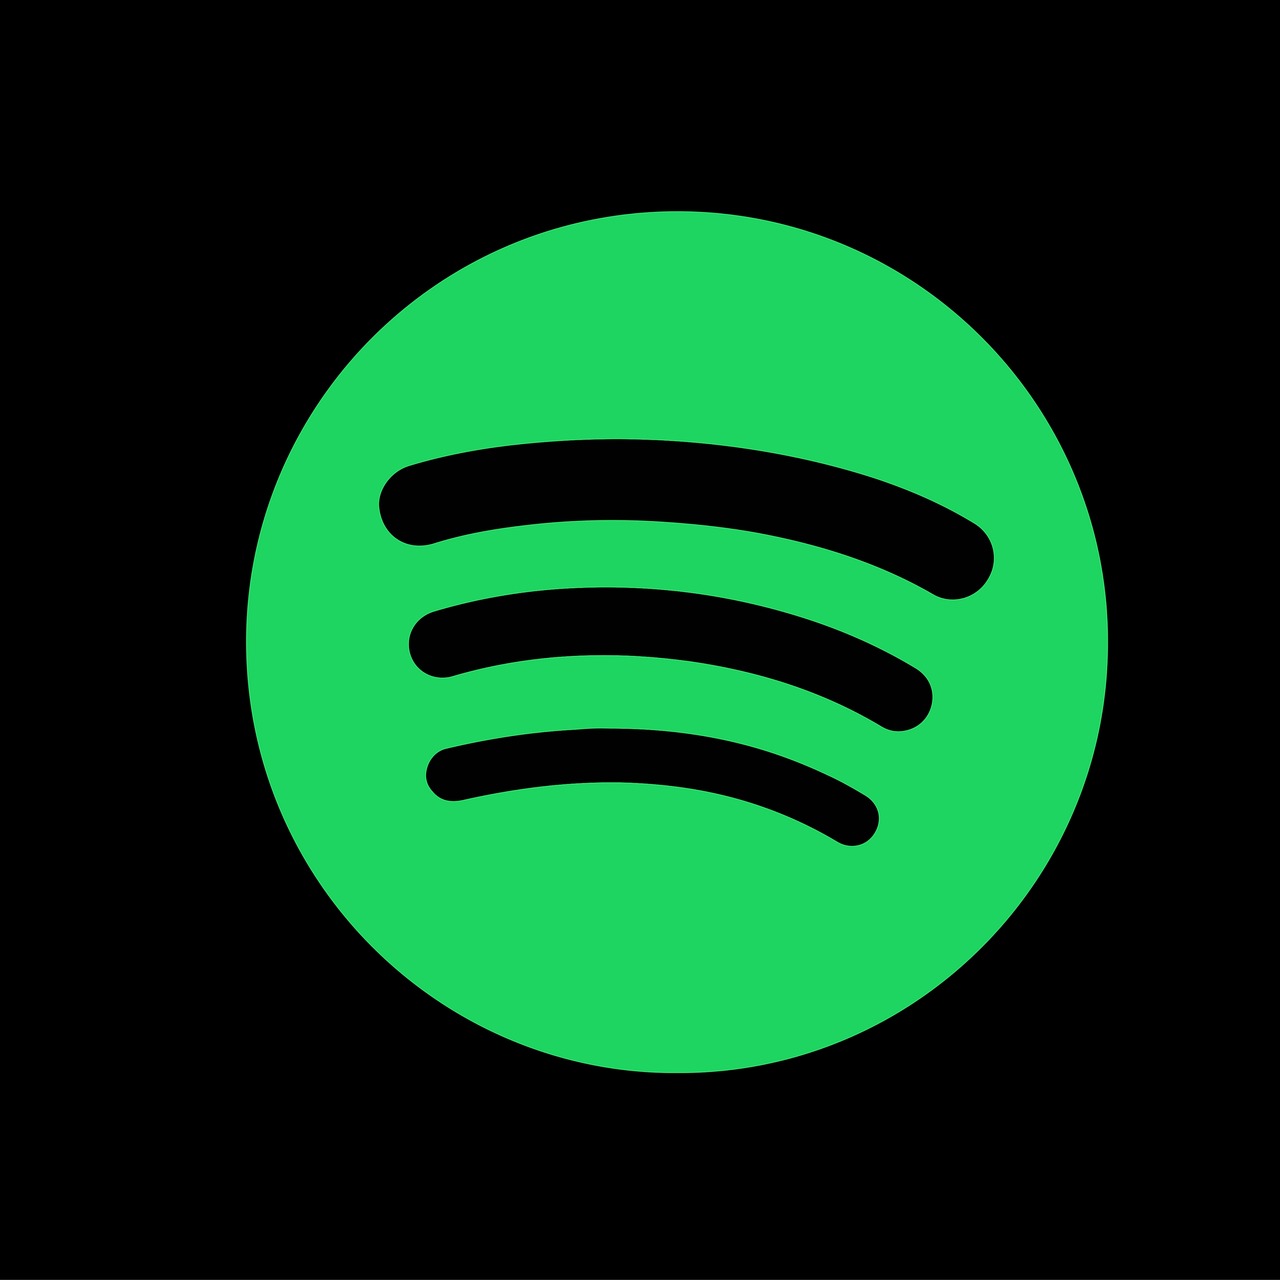 Hillsdale Spotify account brings students together, showcases original student music